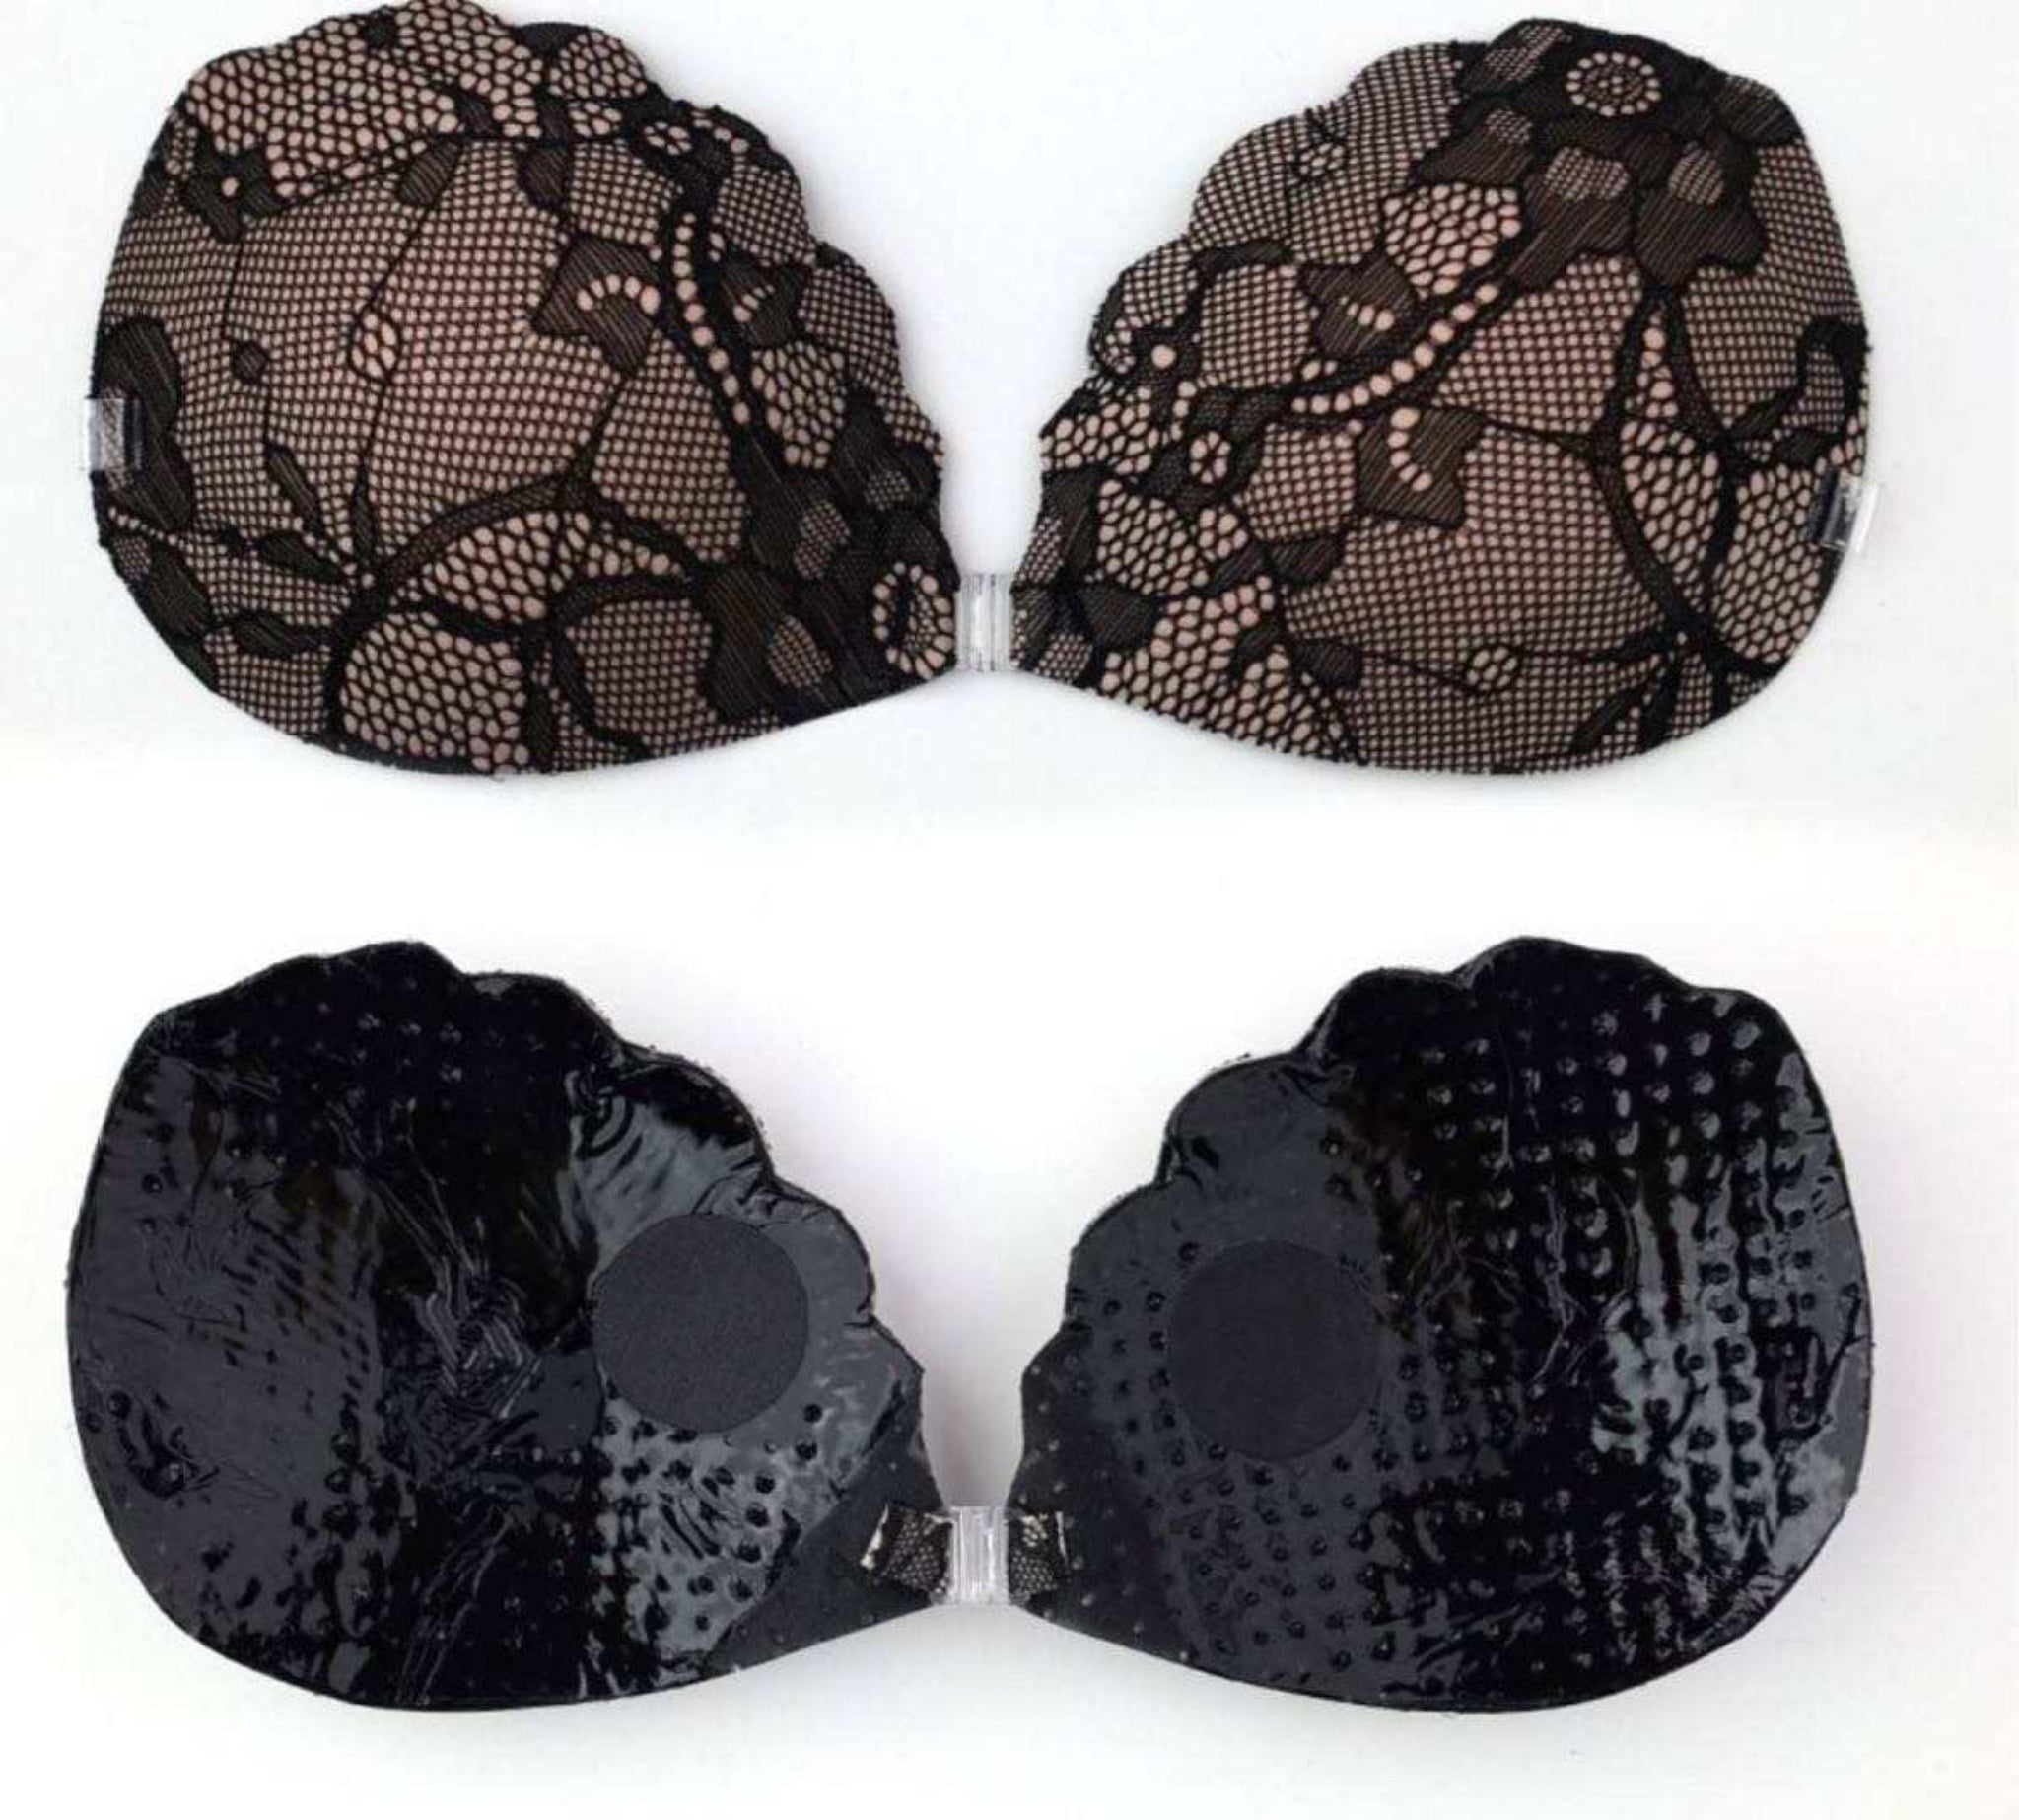 Buy Lace-Up Stick-On Push-Up Bra from Next